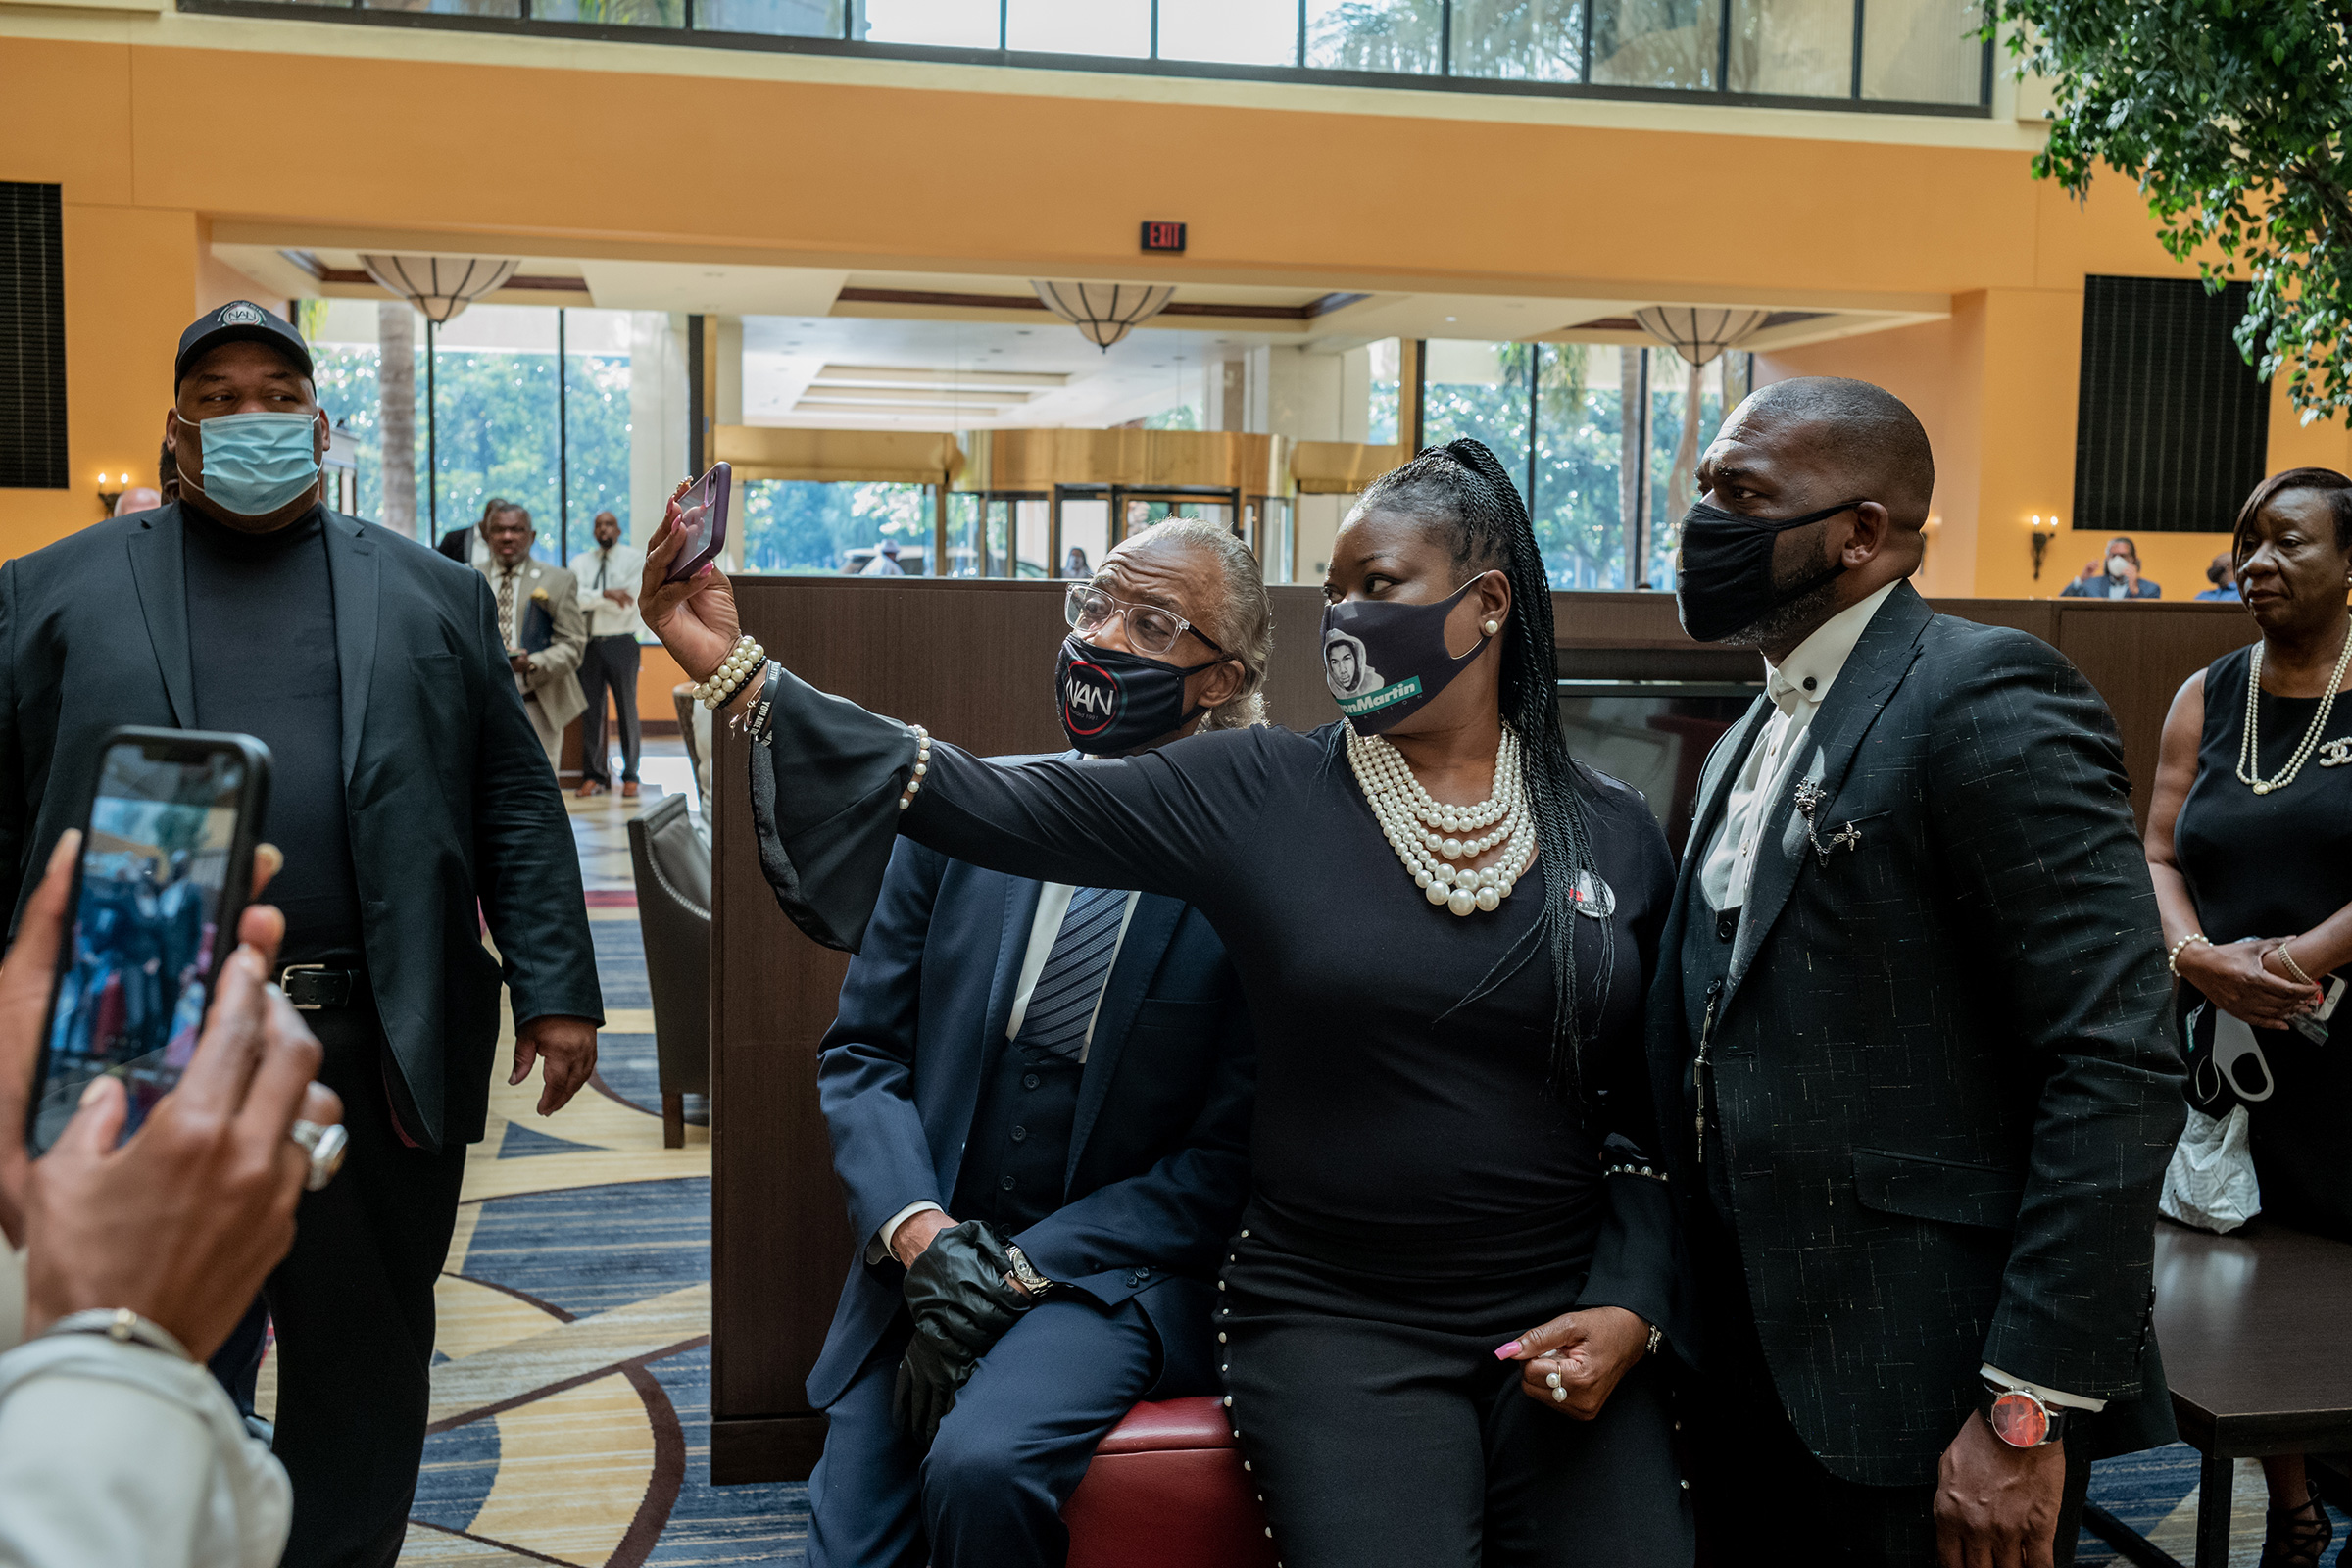 Rev. Al Sharpton takes a photograph with Sybrina Fulton and Pastor Jamal H Bryant before George Floyd's funeral on June 9, 2020. (Ruddy Roye for TIME)